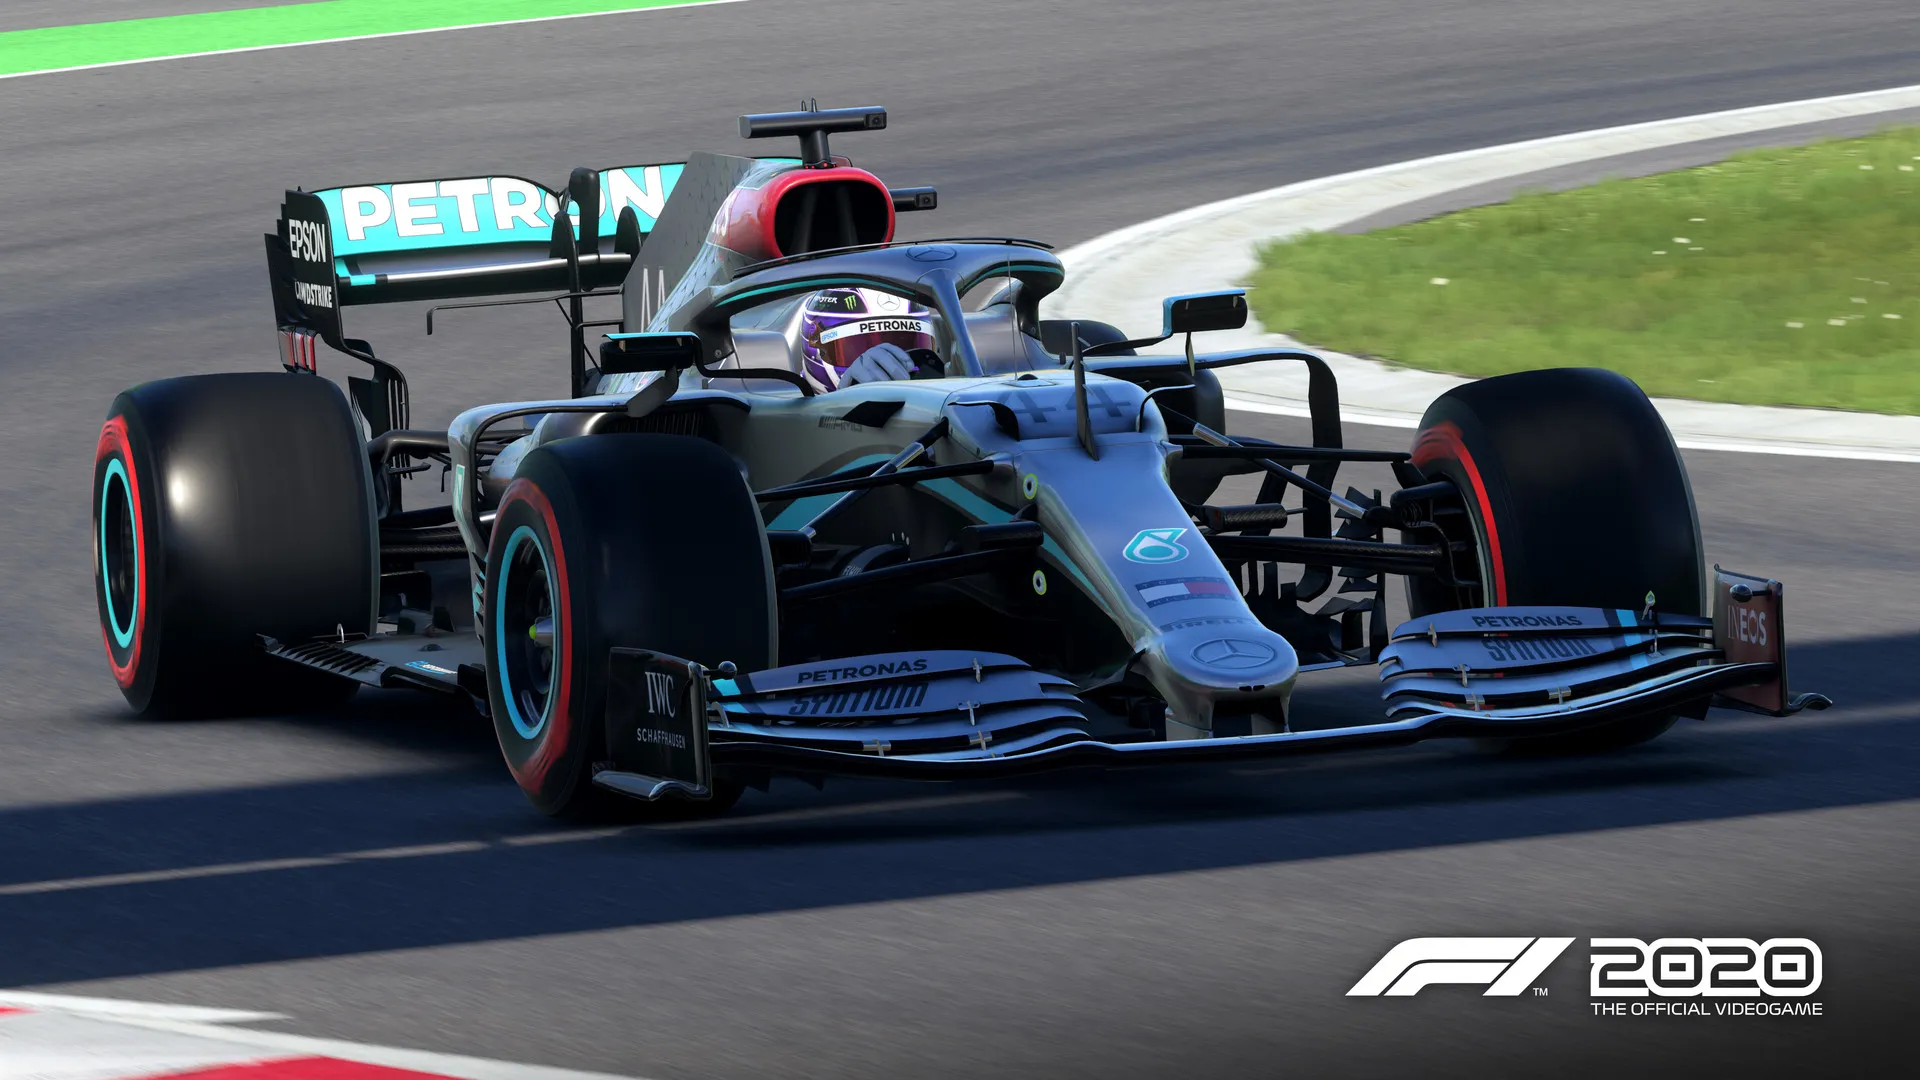 F1 2020 review: Finishing in first place